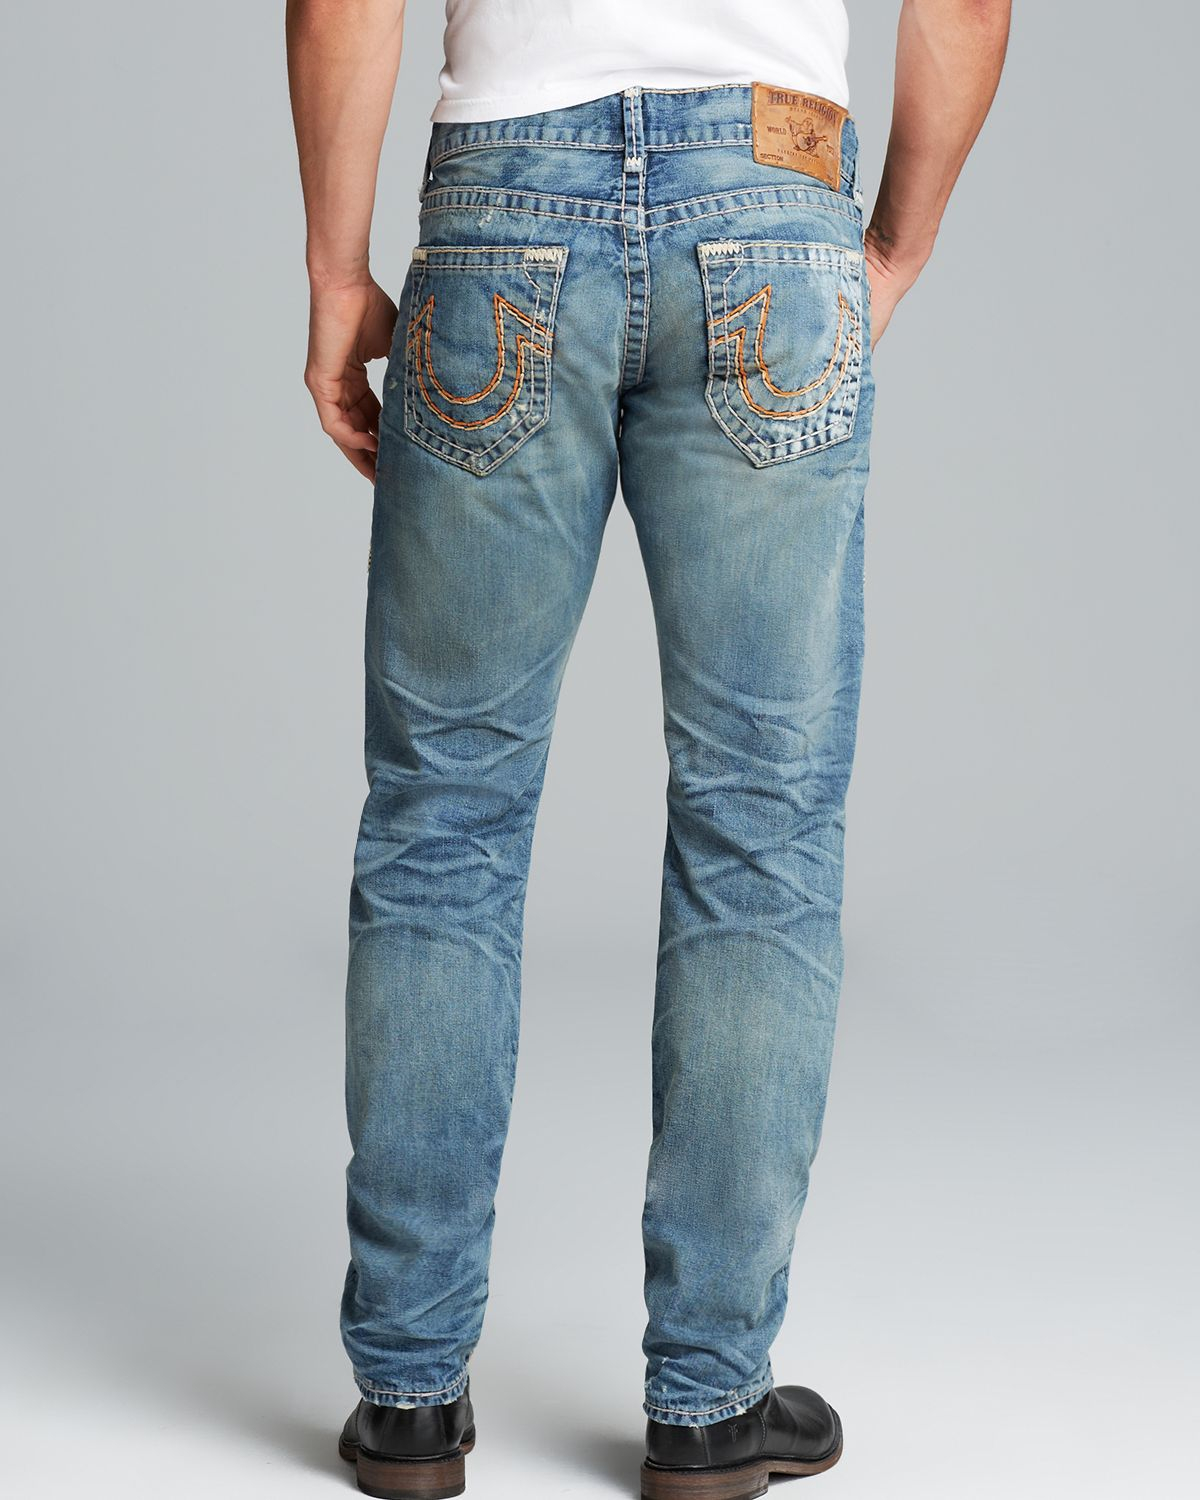 Lyst - True Religion Jeans Geno Super T Distressed Straight Fit in ...